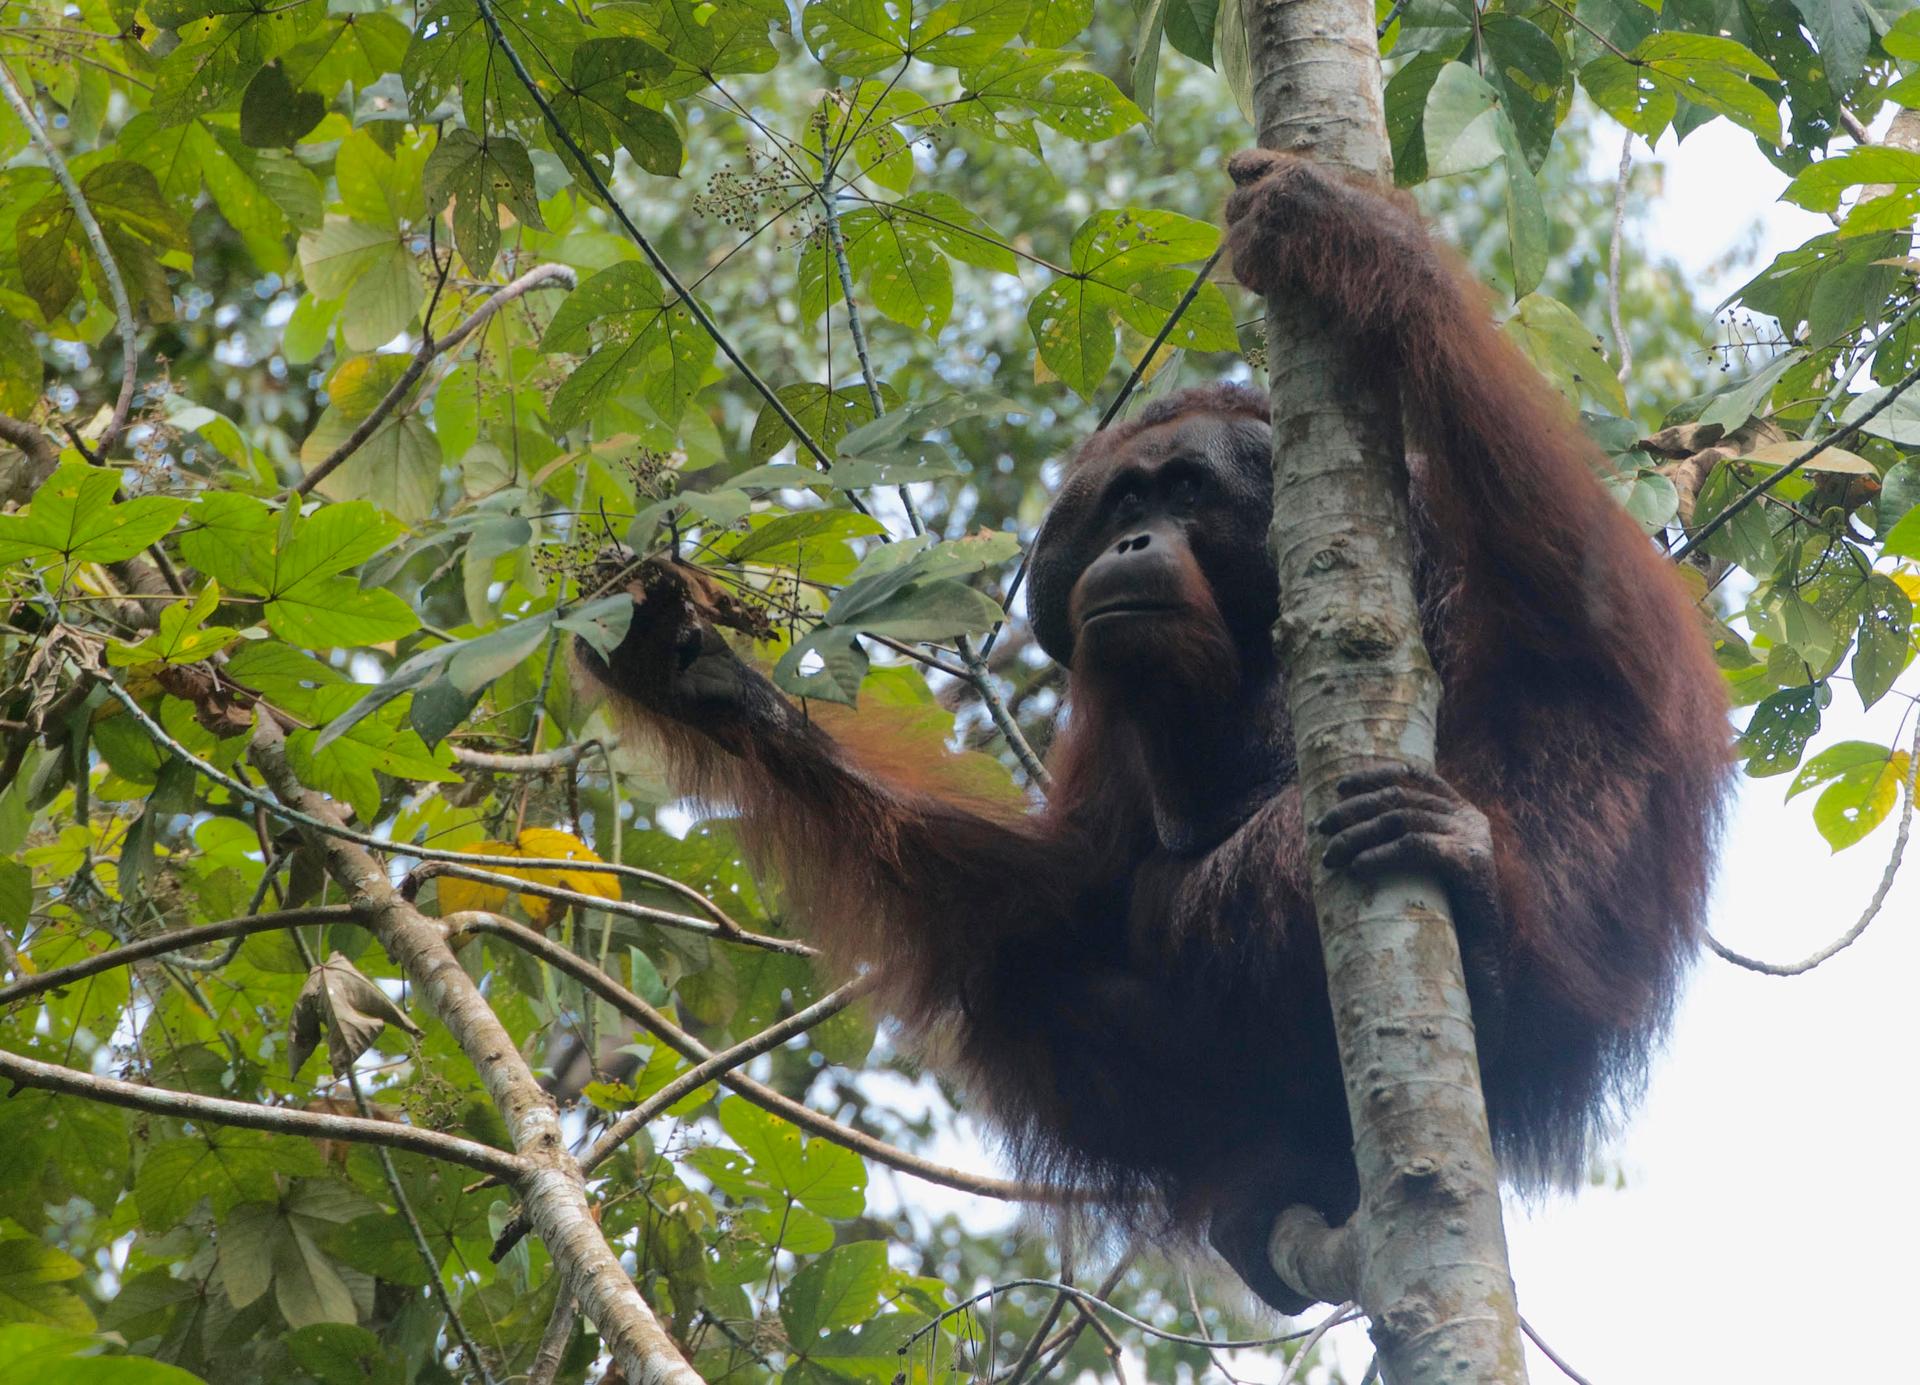 Conservationists worry that people across the tropics who have lost their jobs may poach wildlife for food, accidentally catching threatened animals like the orangutan.